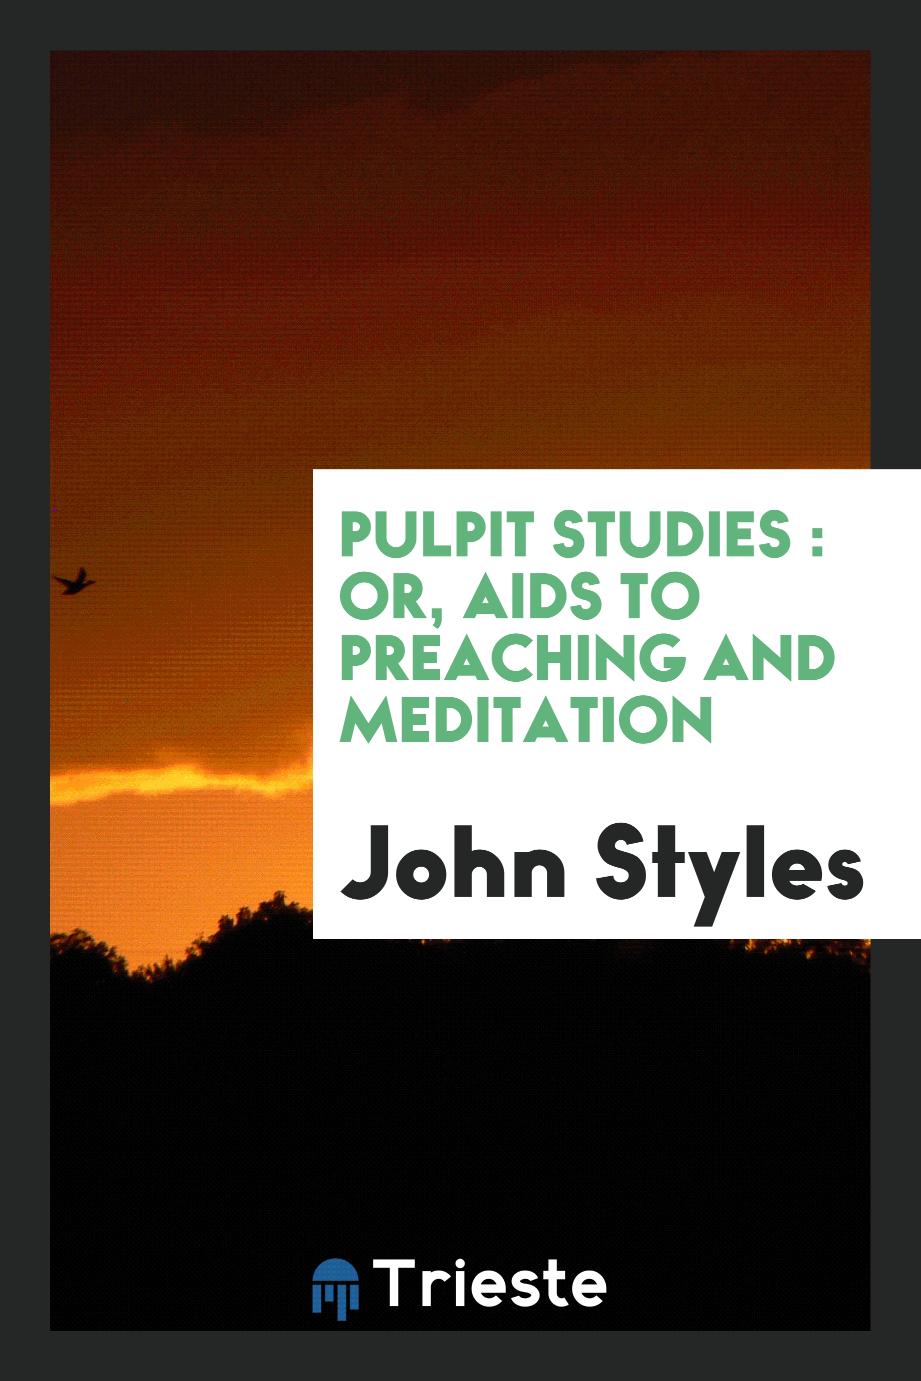 Pulpit studies : or, aids to preaching and meditation